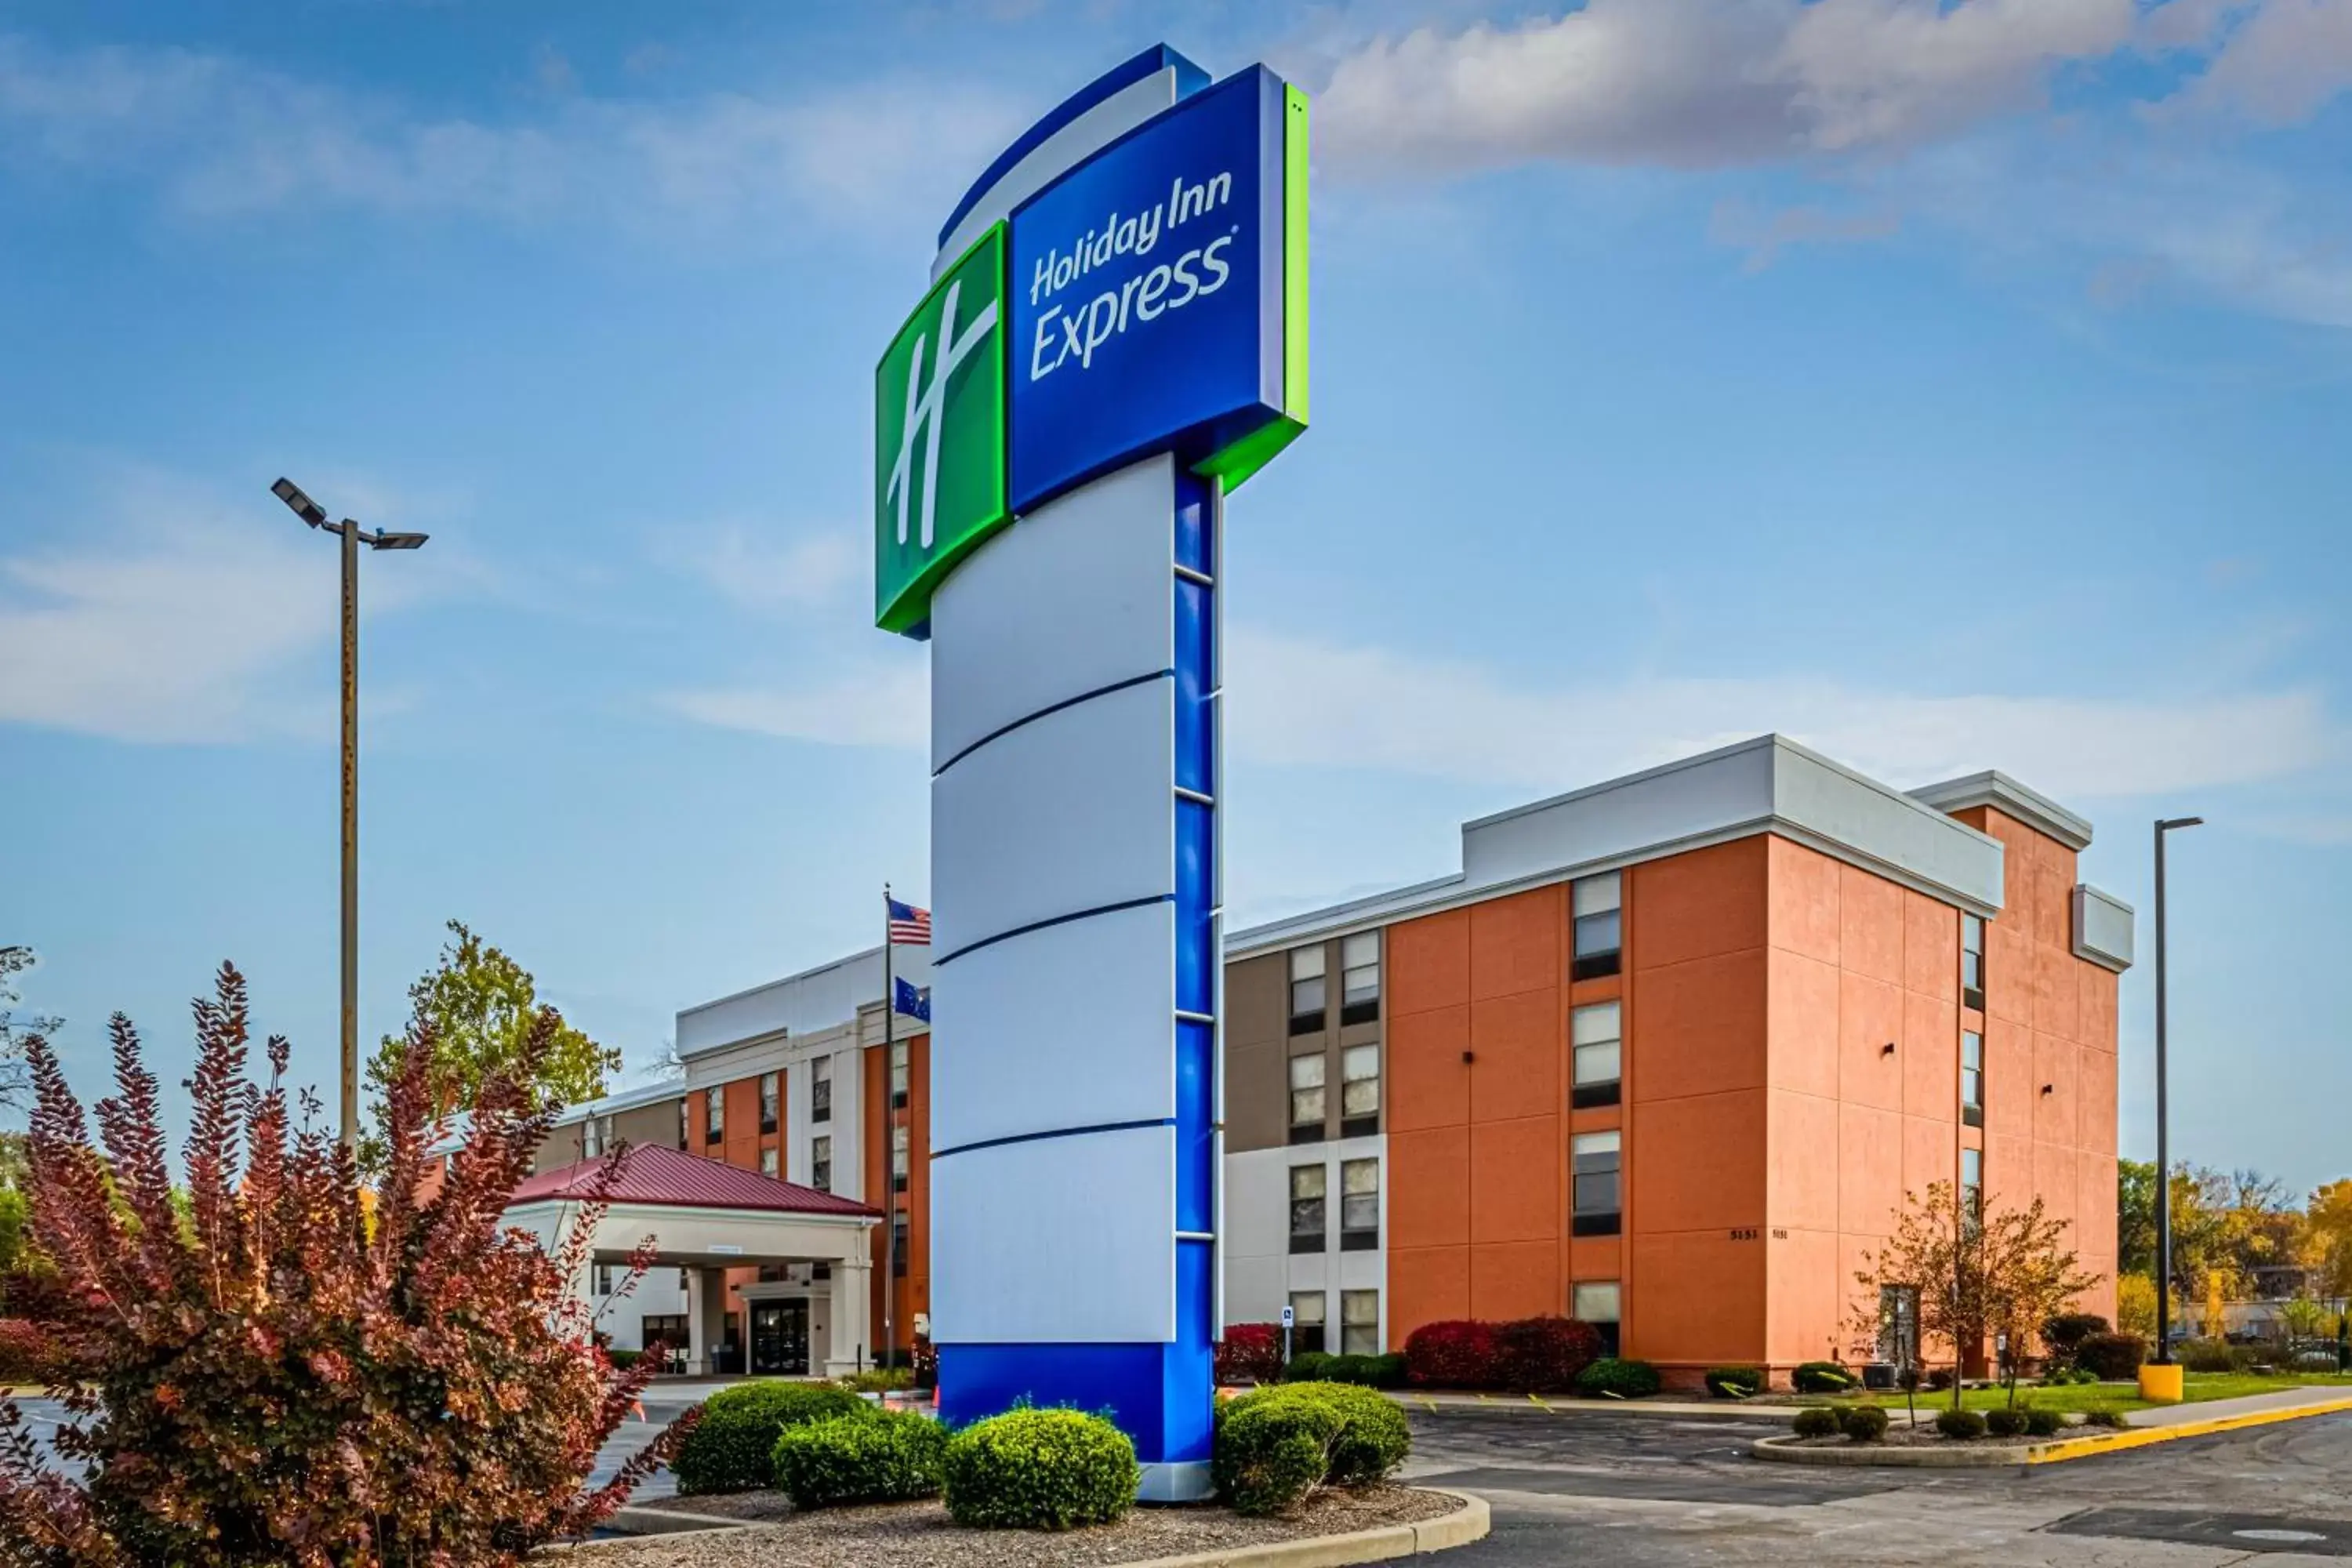 Property building in Holiday Inn Express Indianapolis South, an IHG Hotel